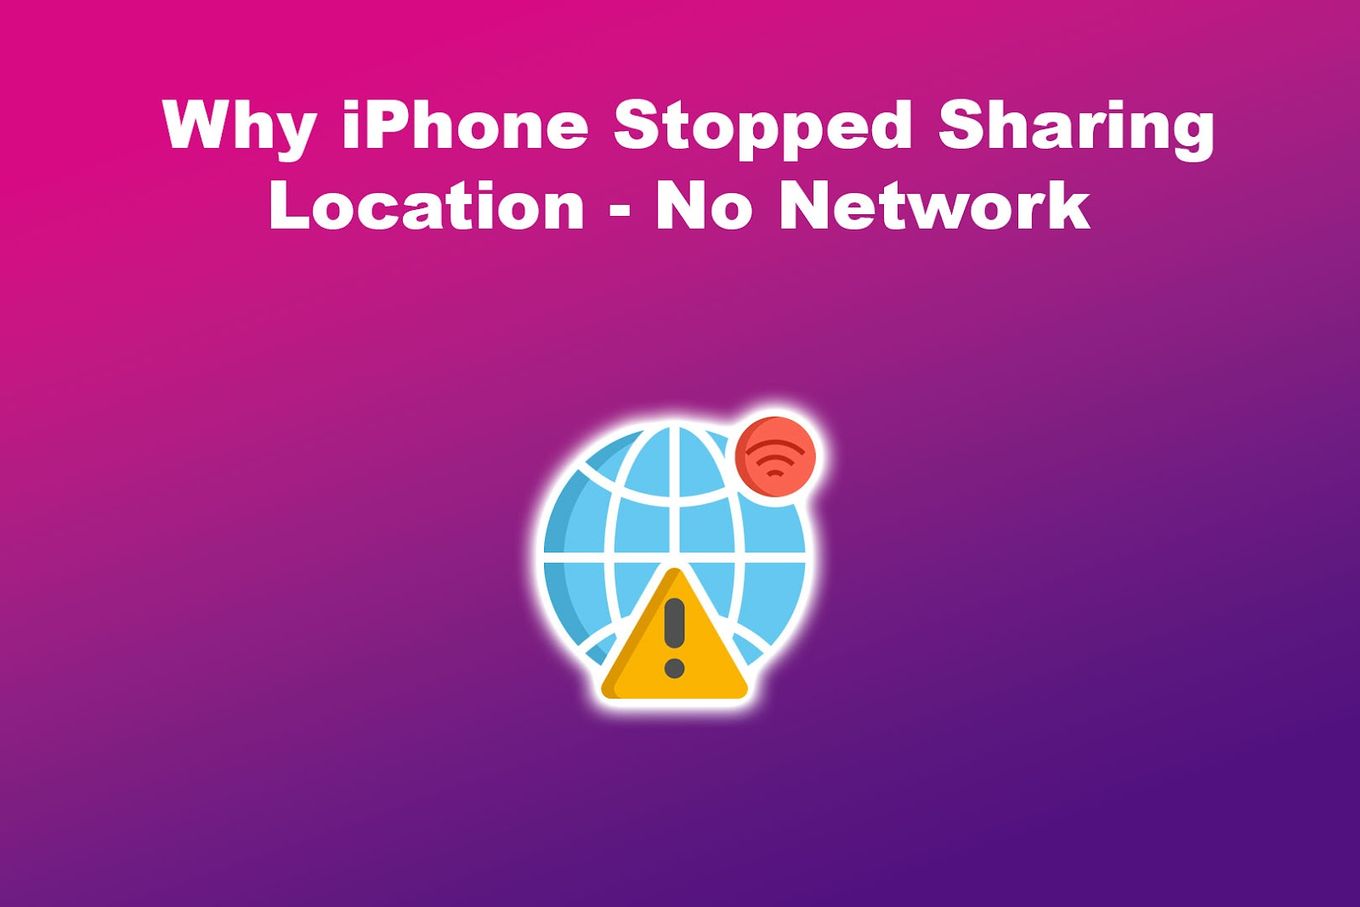 Why iPhone Stopped Sharing Location - No Network